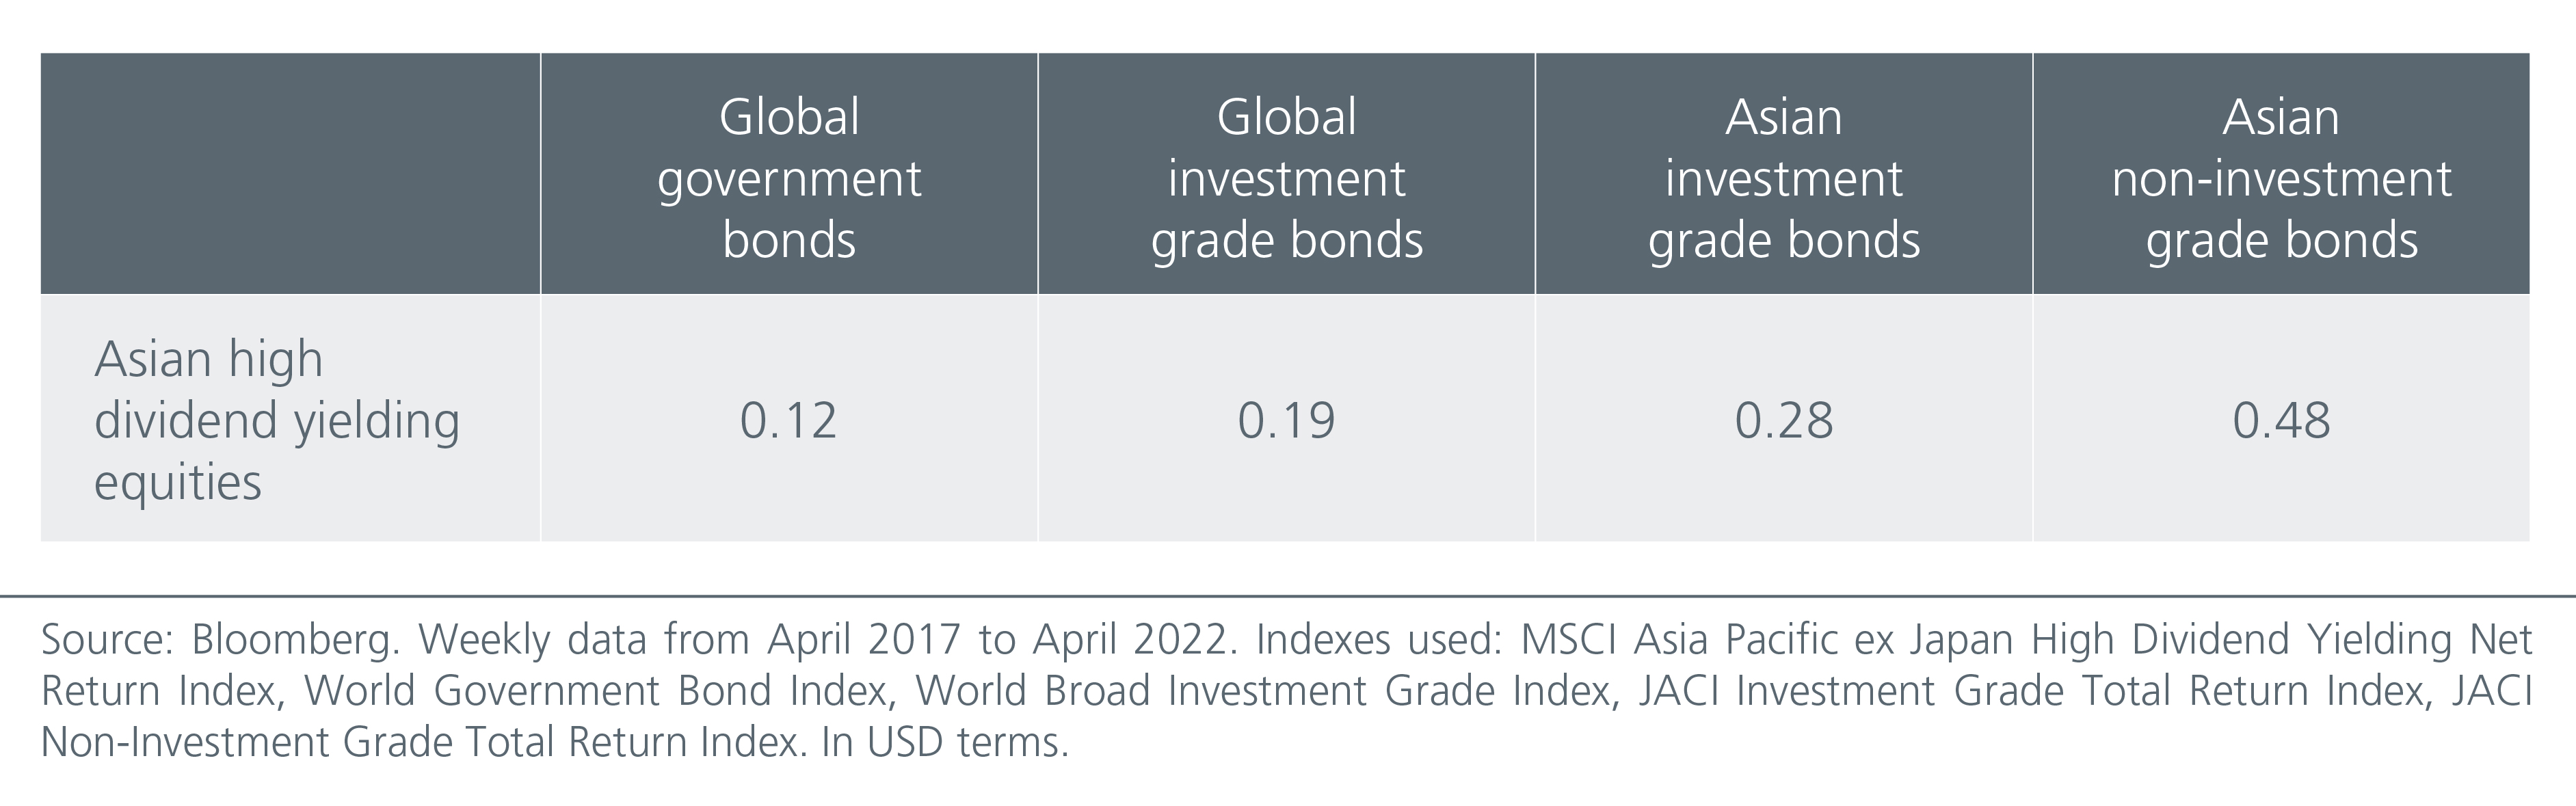 income-investing-in-asia-building-resilience-with-asian-reits-and-dividends-fig4